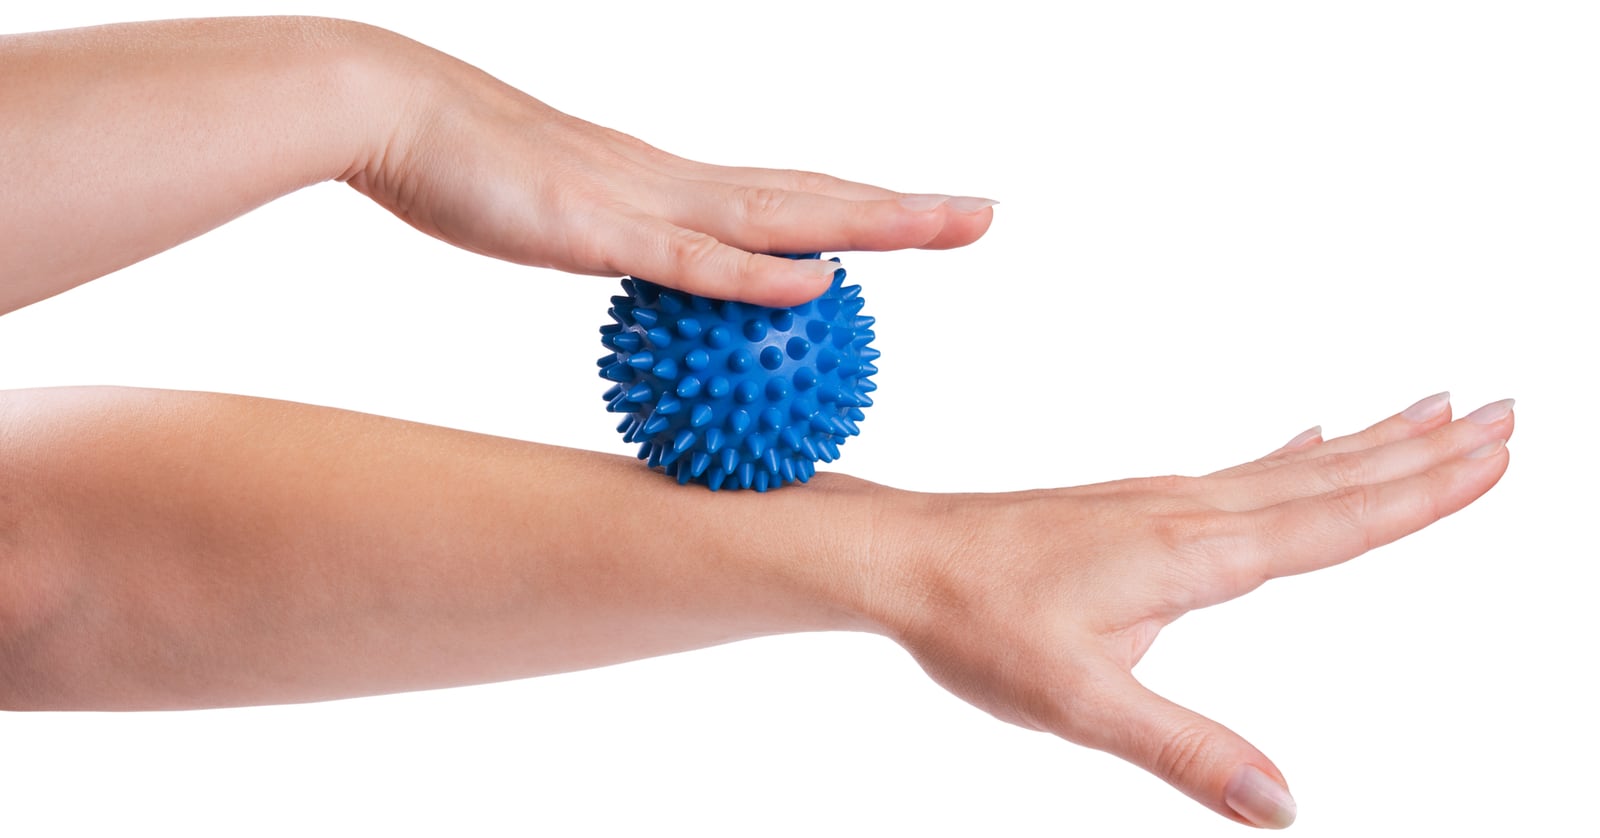 Photo of a woman’s arms, with one hand rolling a massage ball over the other forearm.